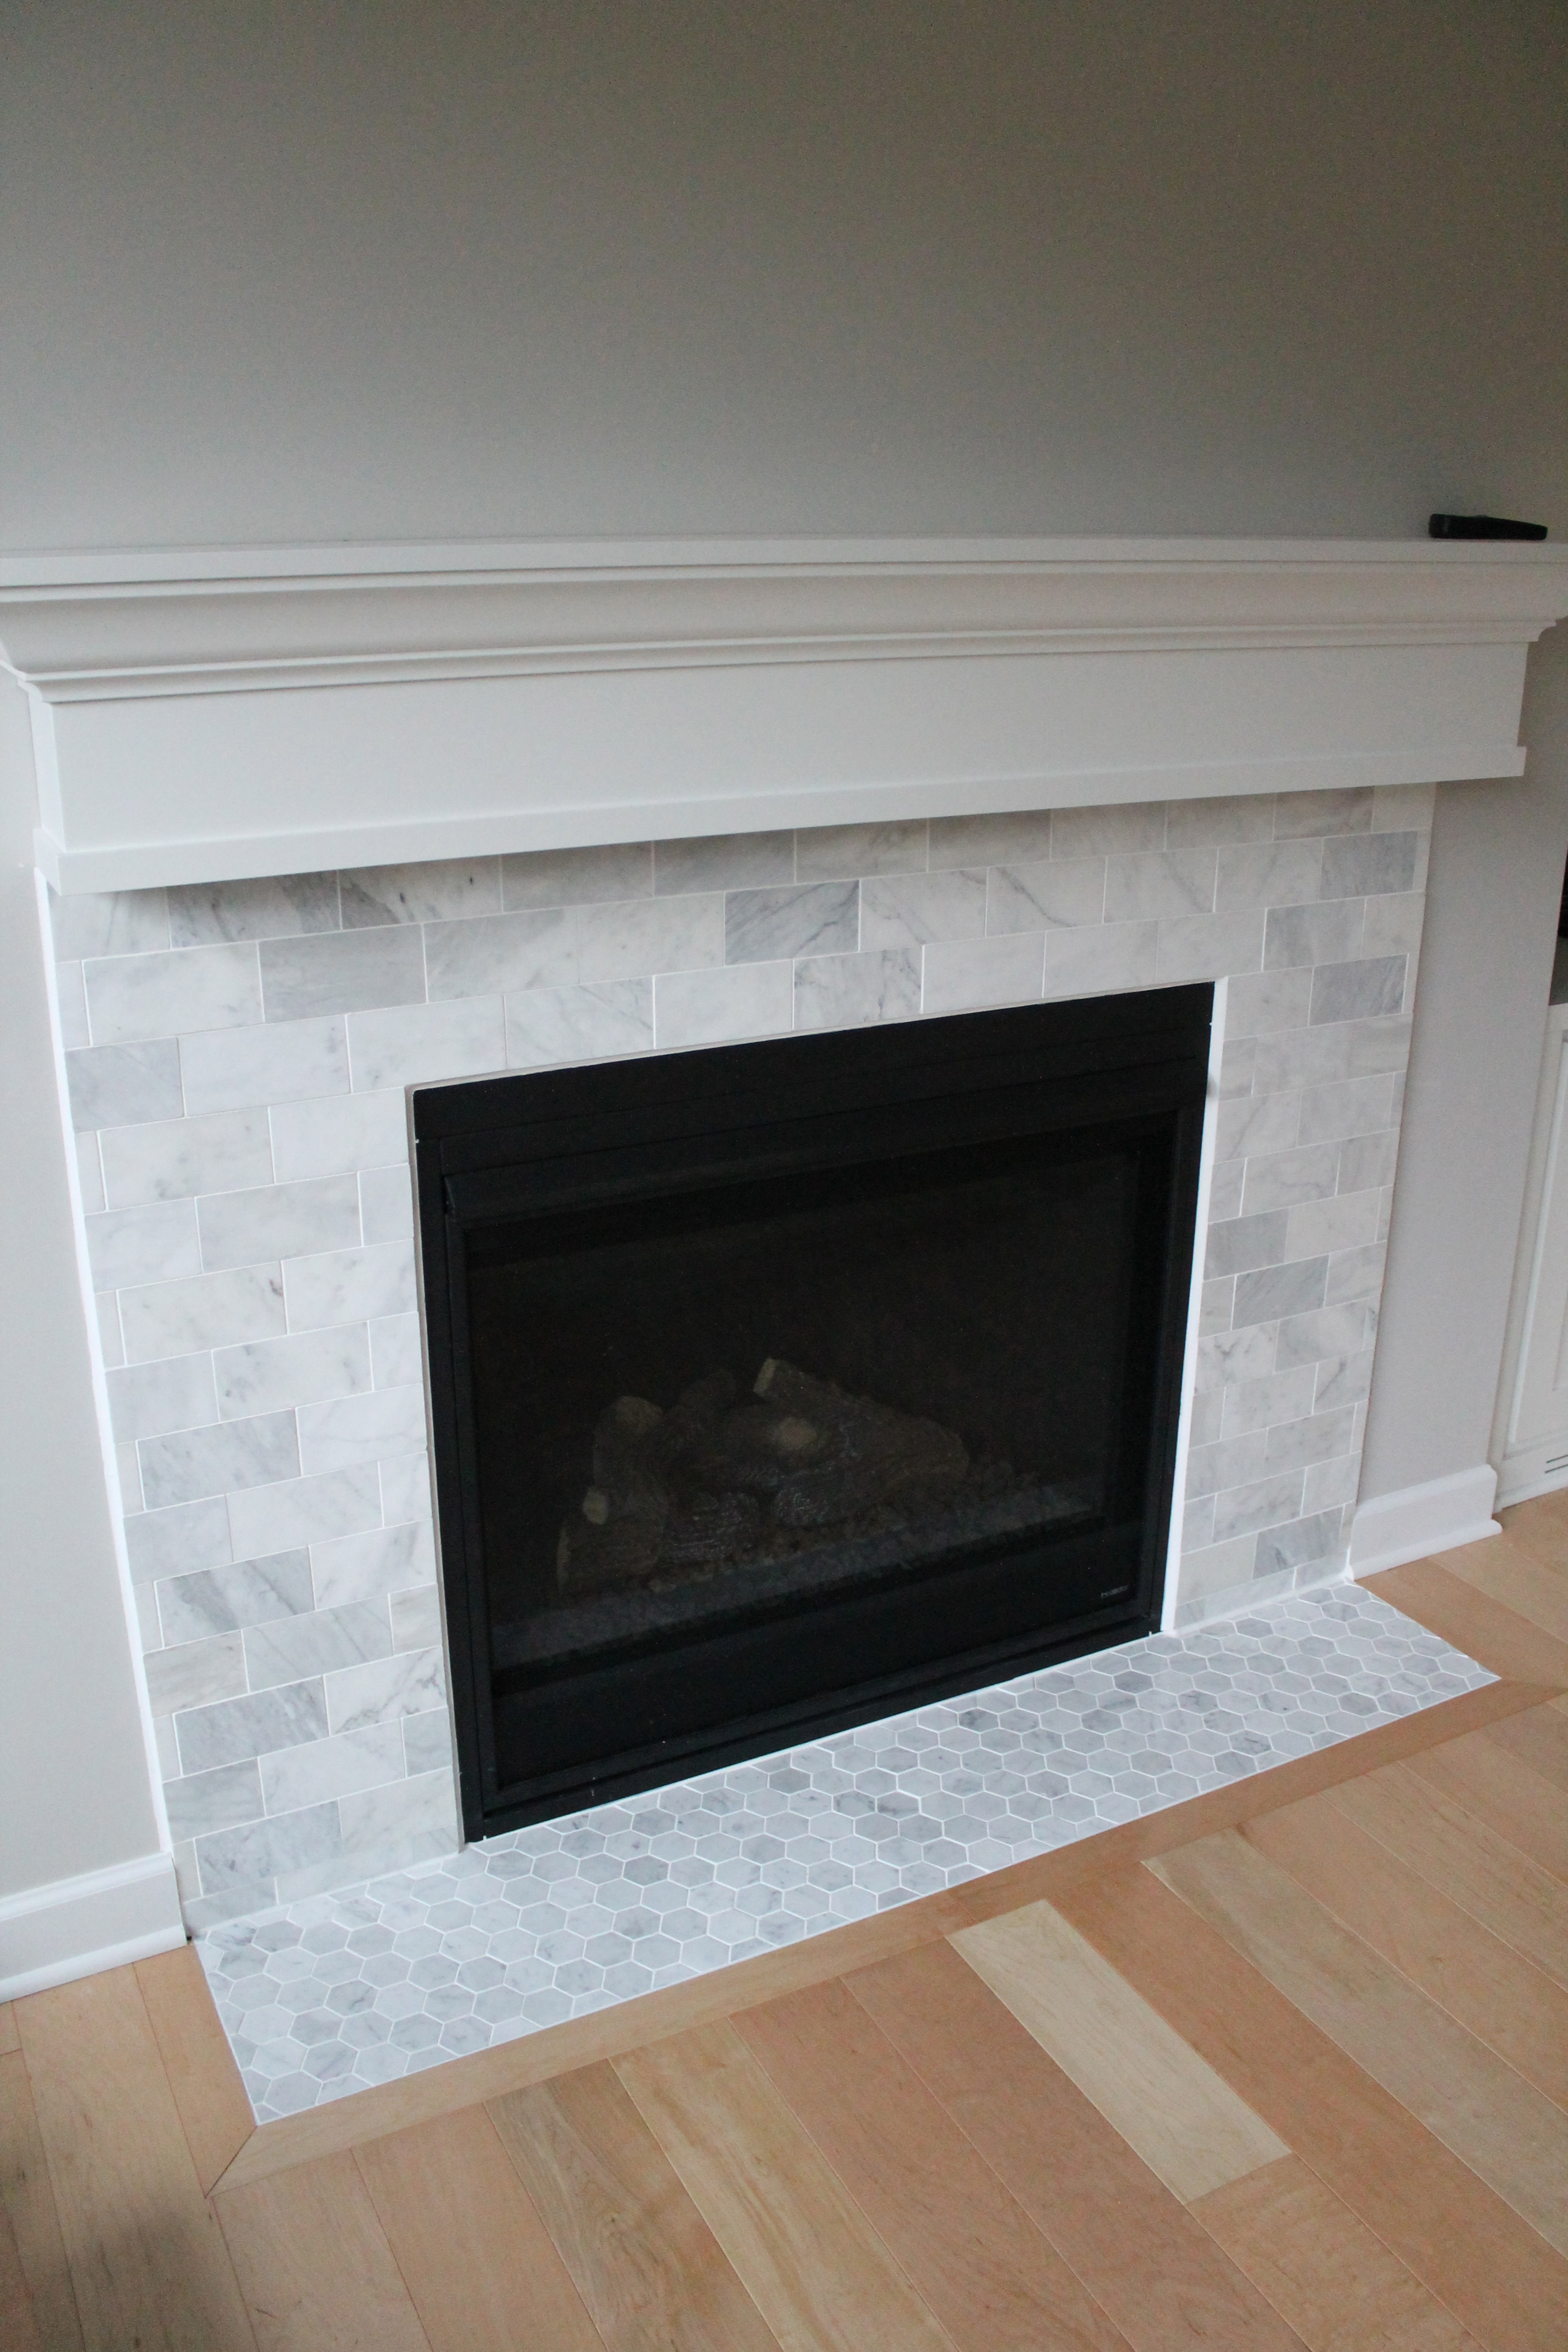 Marble tiles are a common way to add beauty to fireplaces. White is always a marketable and classic color. It is a bright color that reflects light and cleanliness. And marble is an ideal material for low traffic areas like fireplace surrounds. So this tile was a perfect choice!